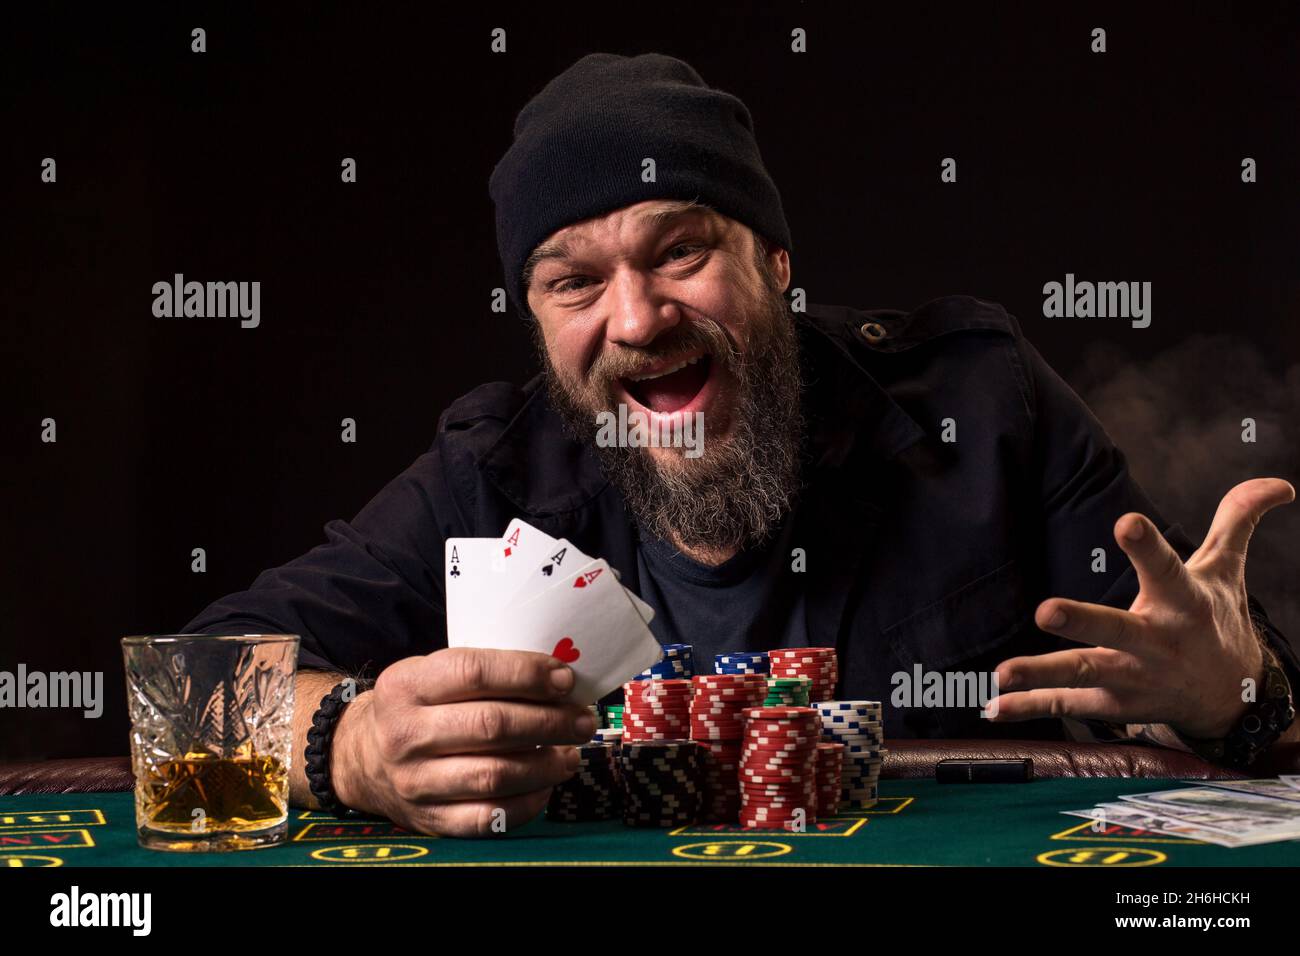 Bearded man drinking whisky while playing poker Stock Photo